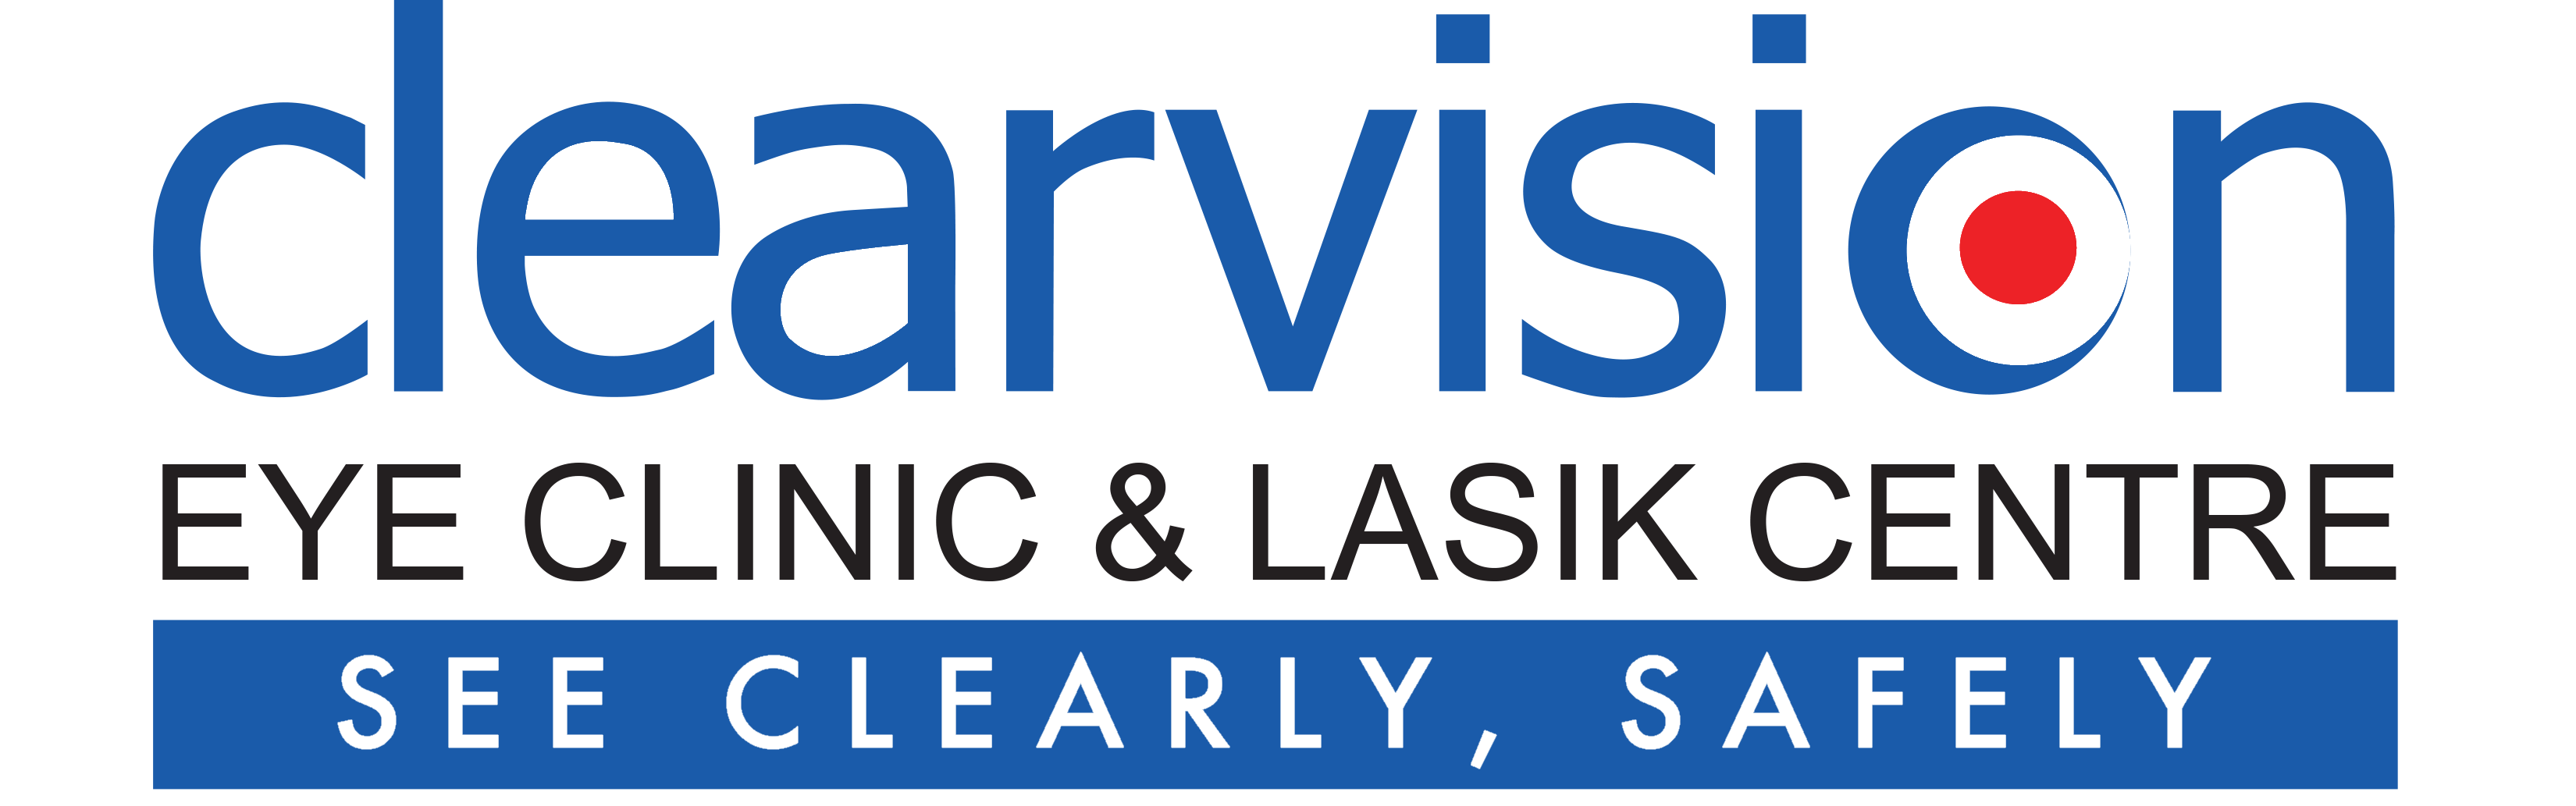 Clearvision Eye Clinic & LASIK Centre Singapore